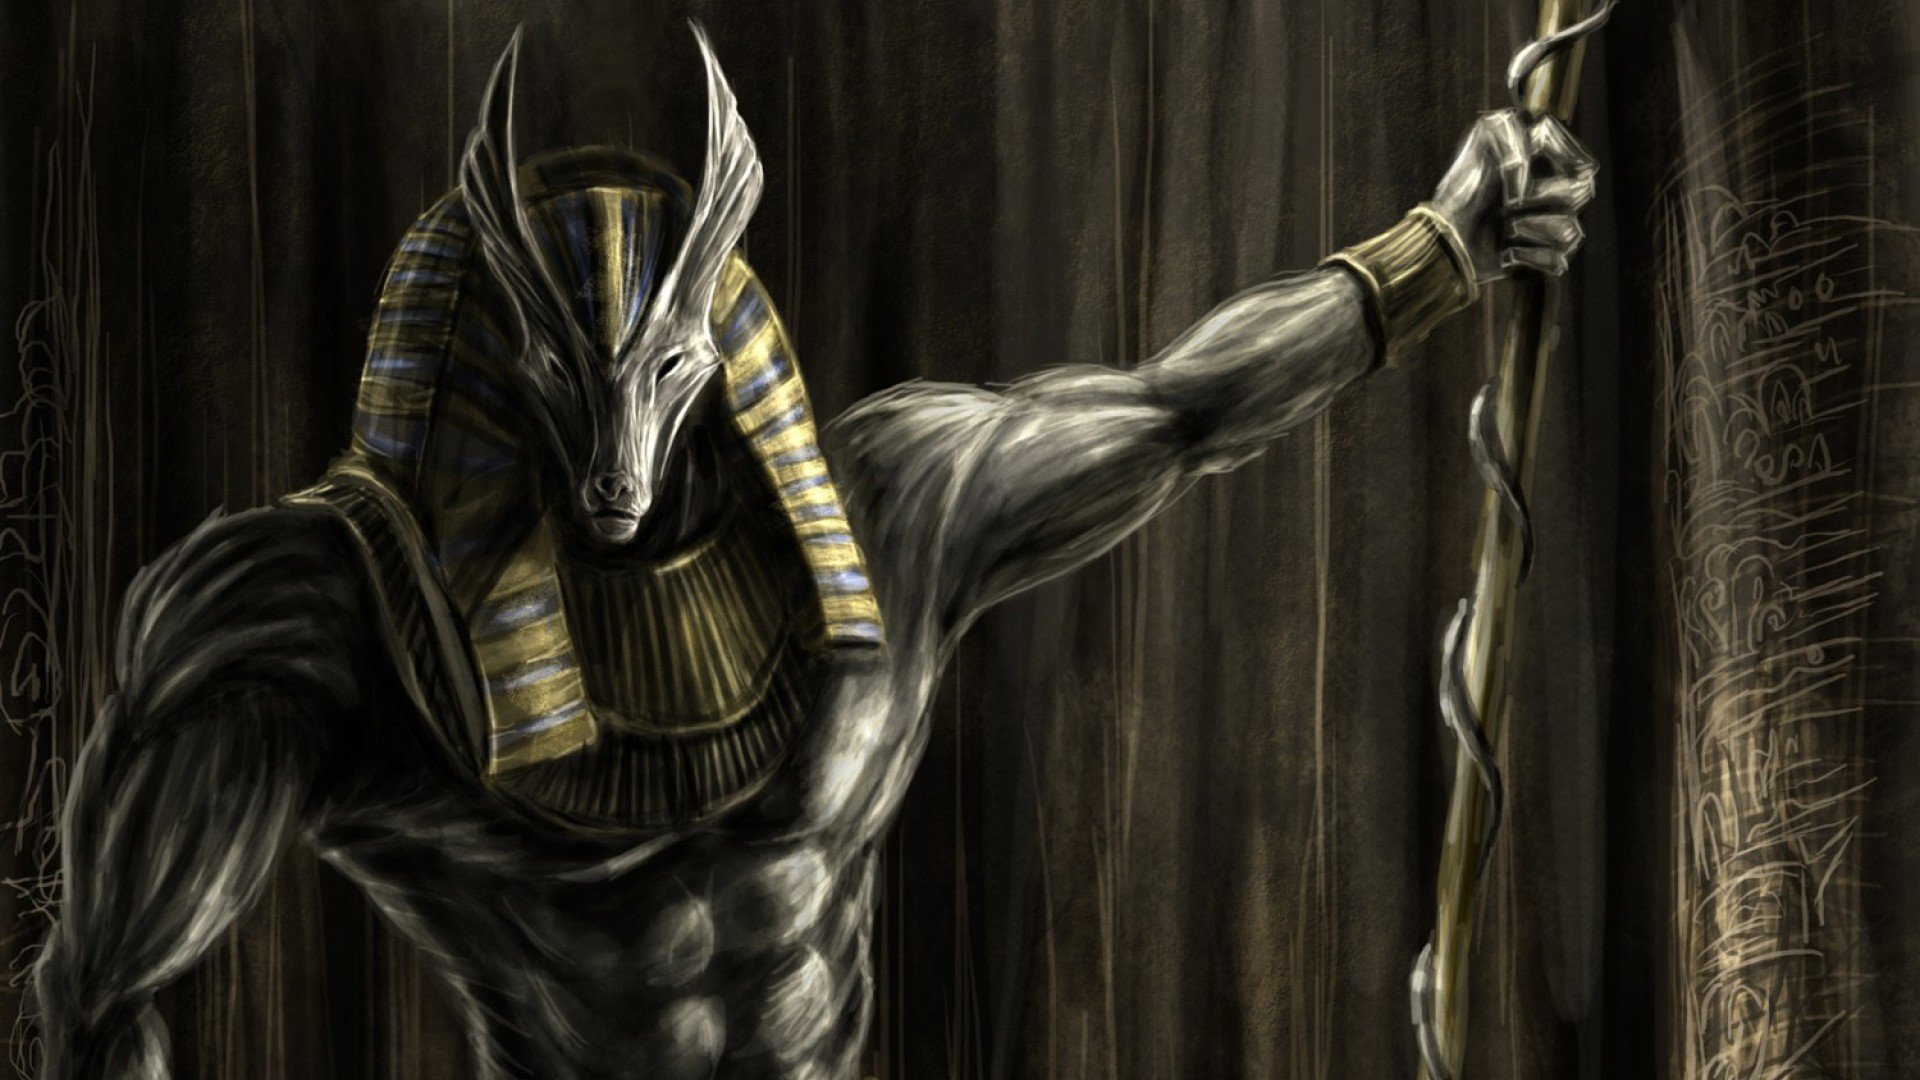 Anubys Egyptian God of the Dead wallpaper 1920x1080 563550 1920x1080